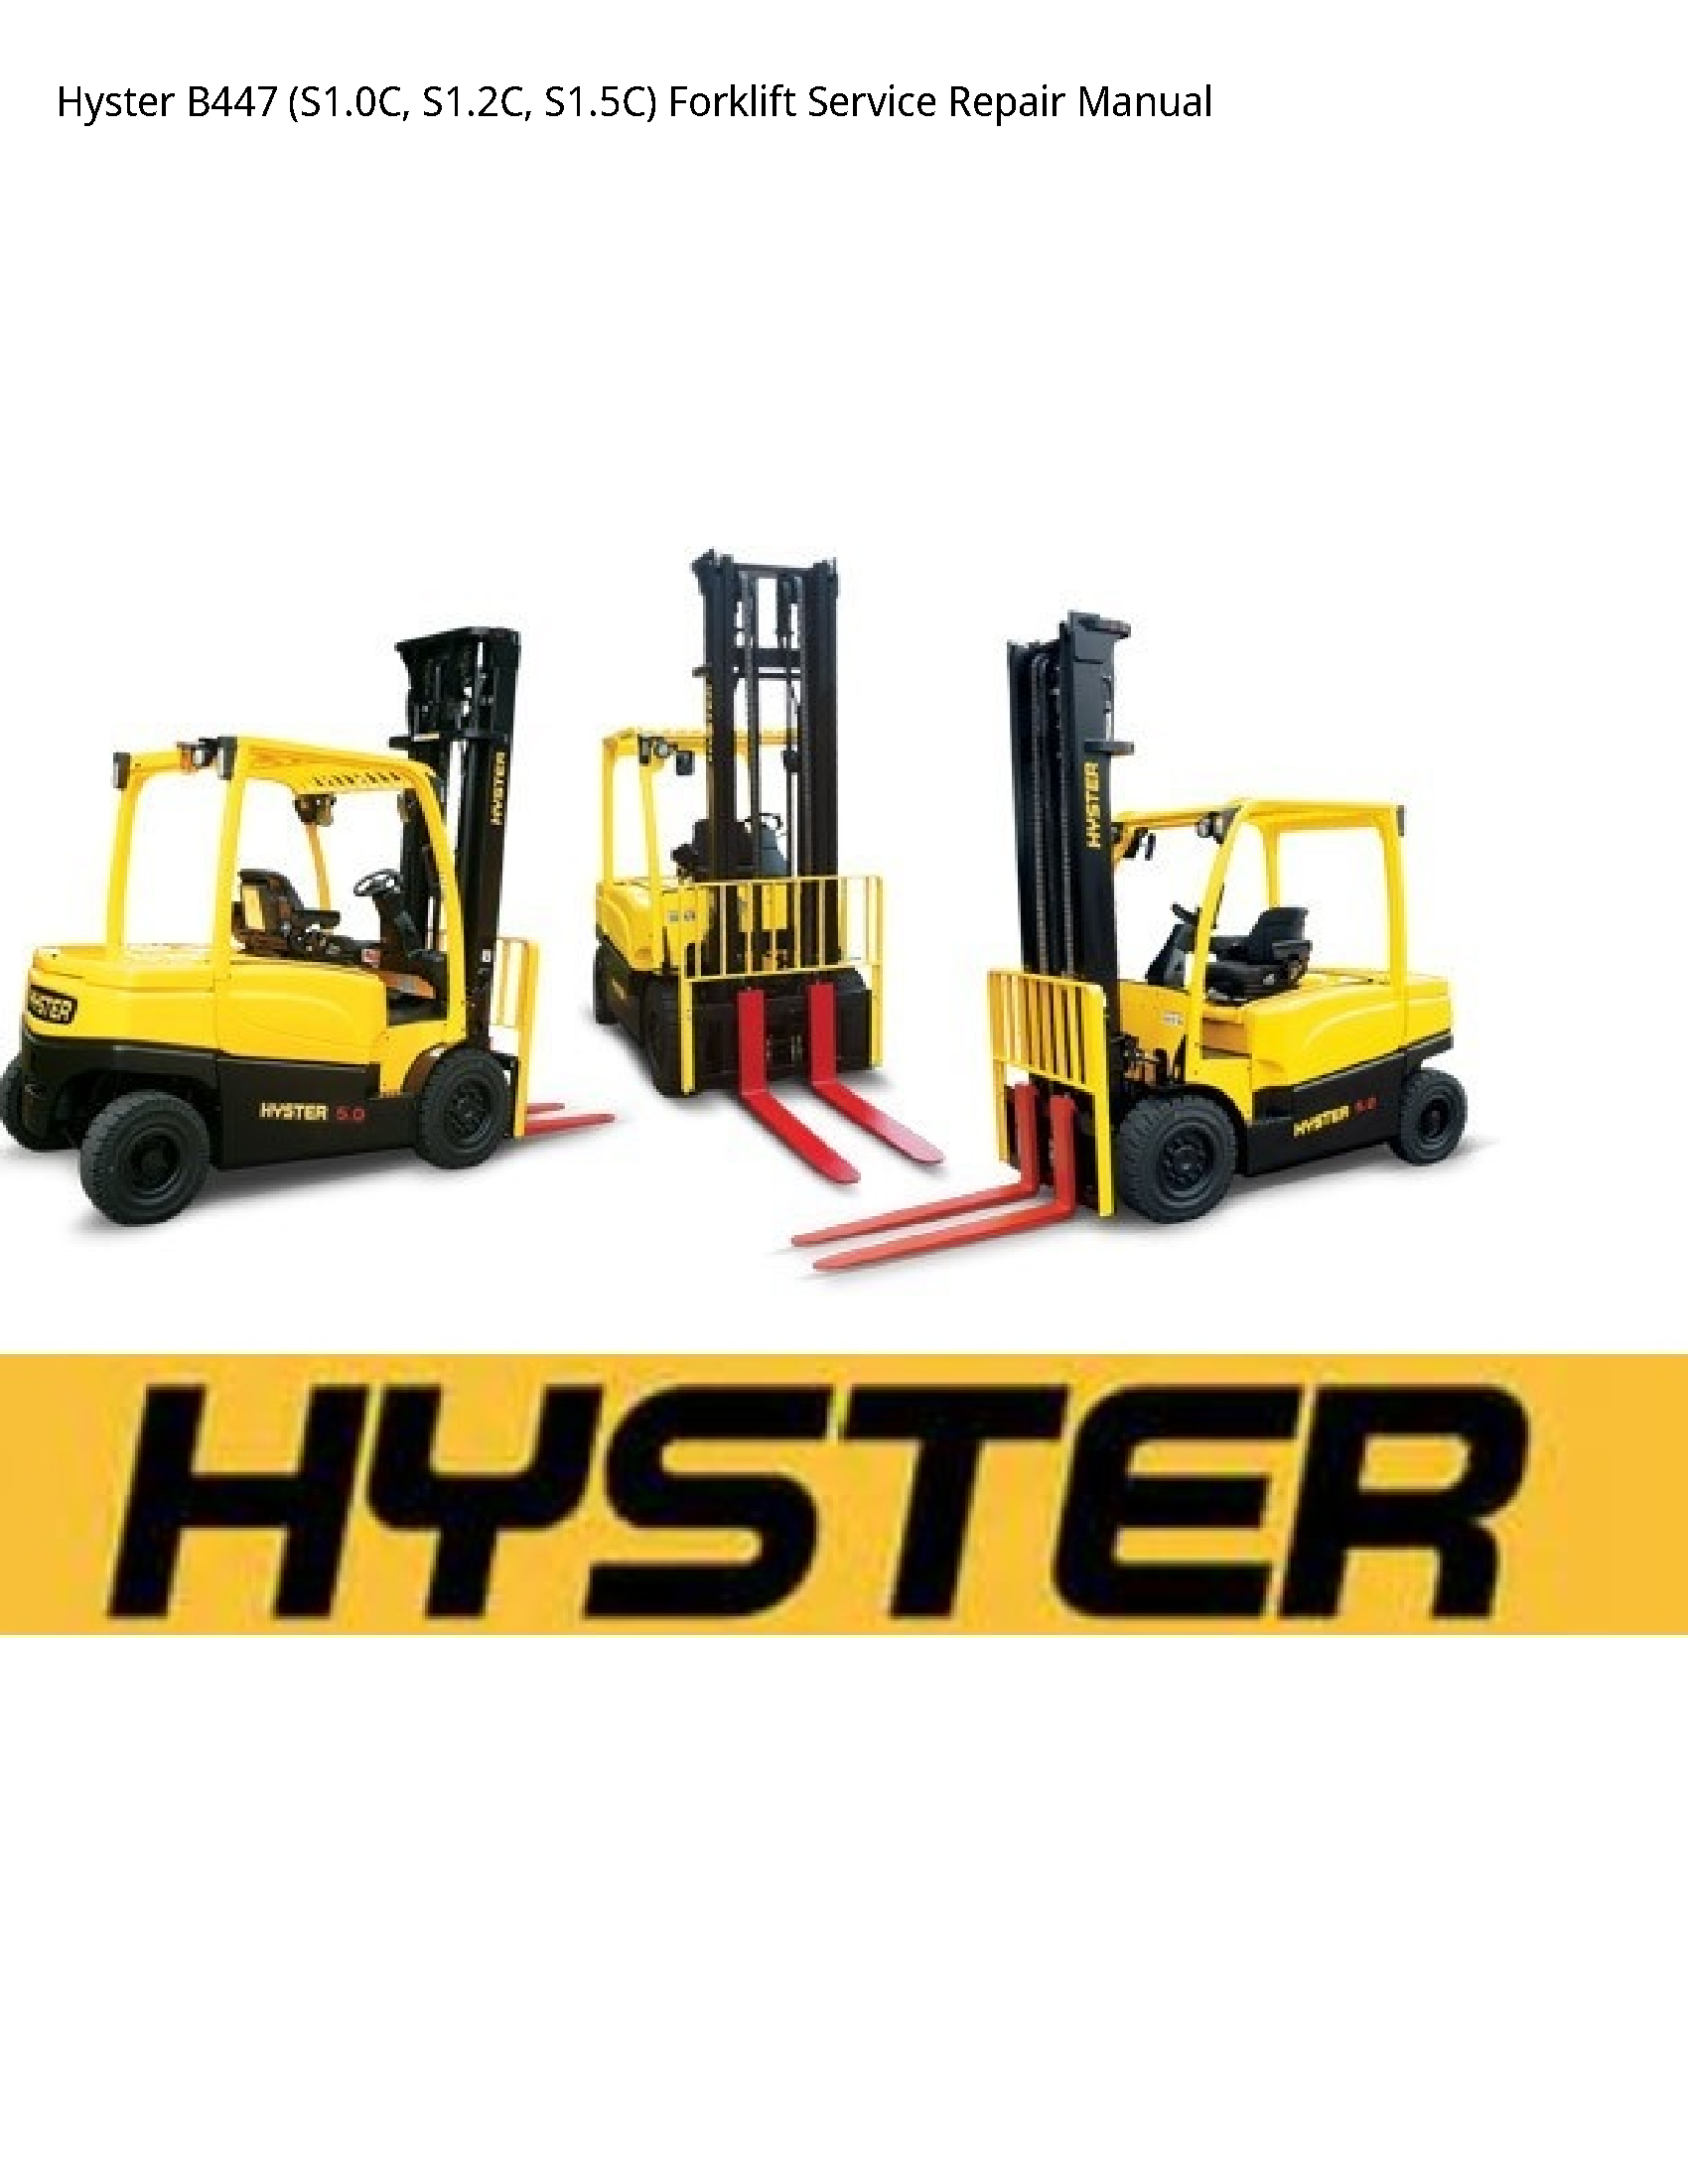 Hyster B447 Forklift manual